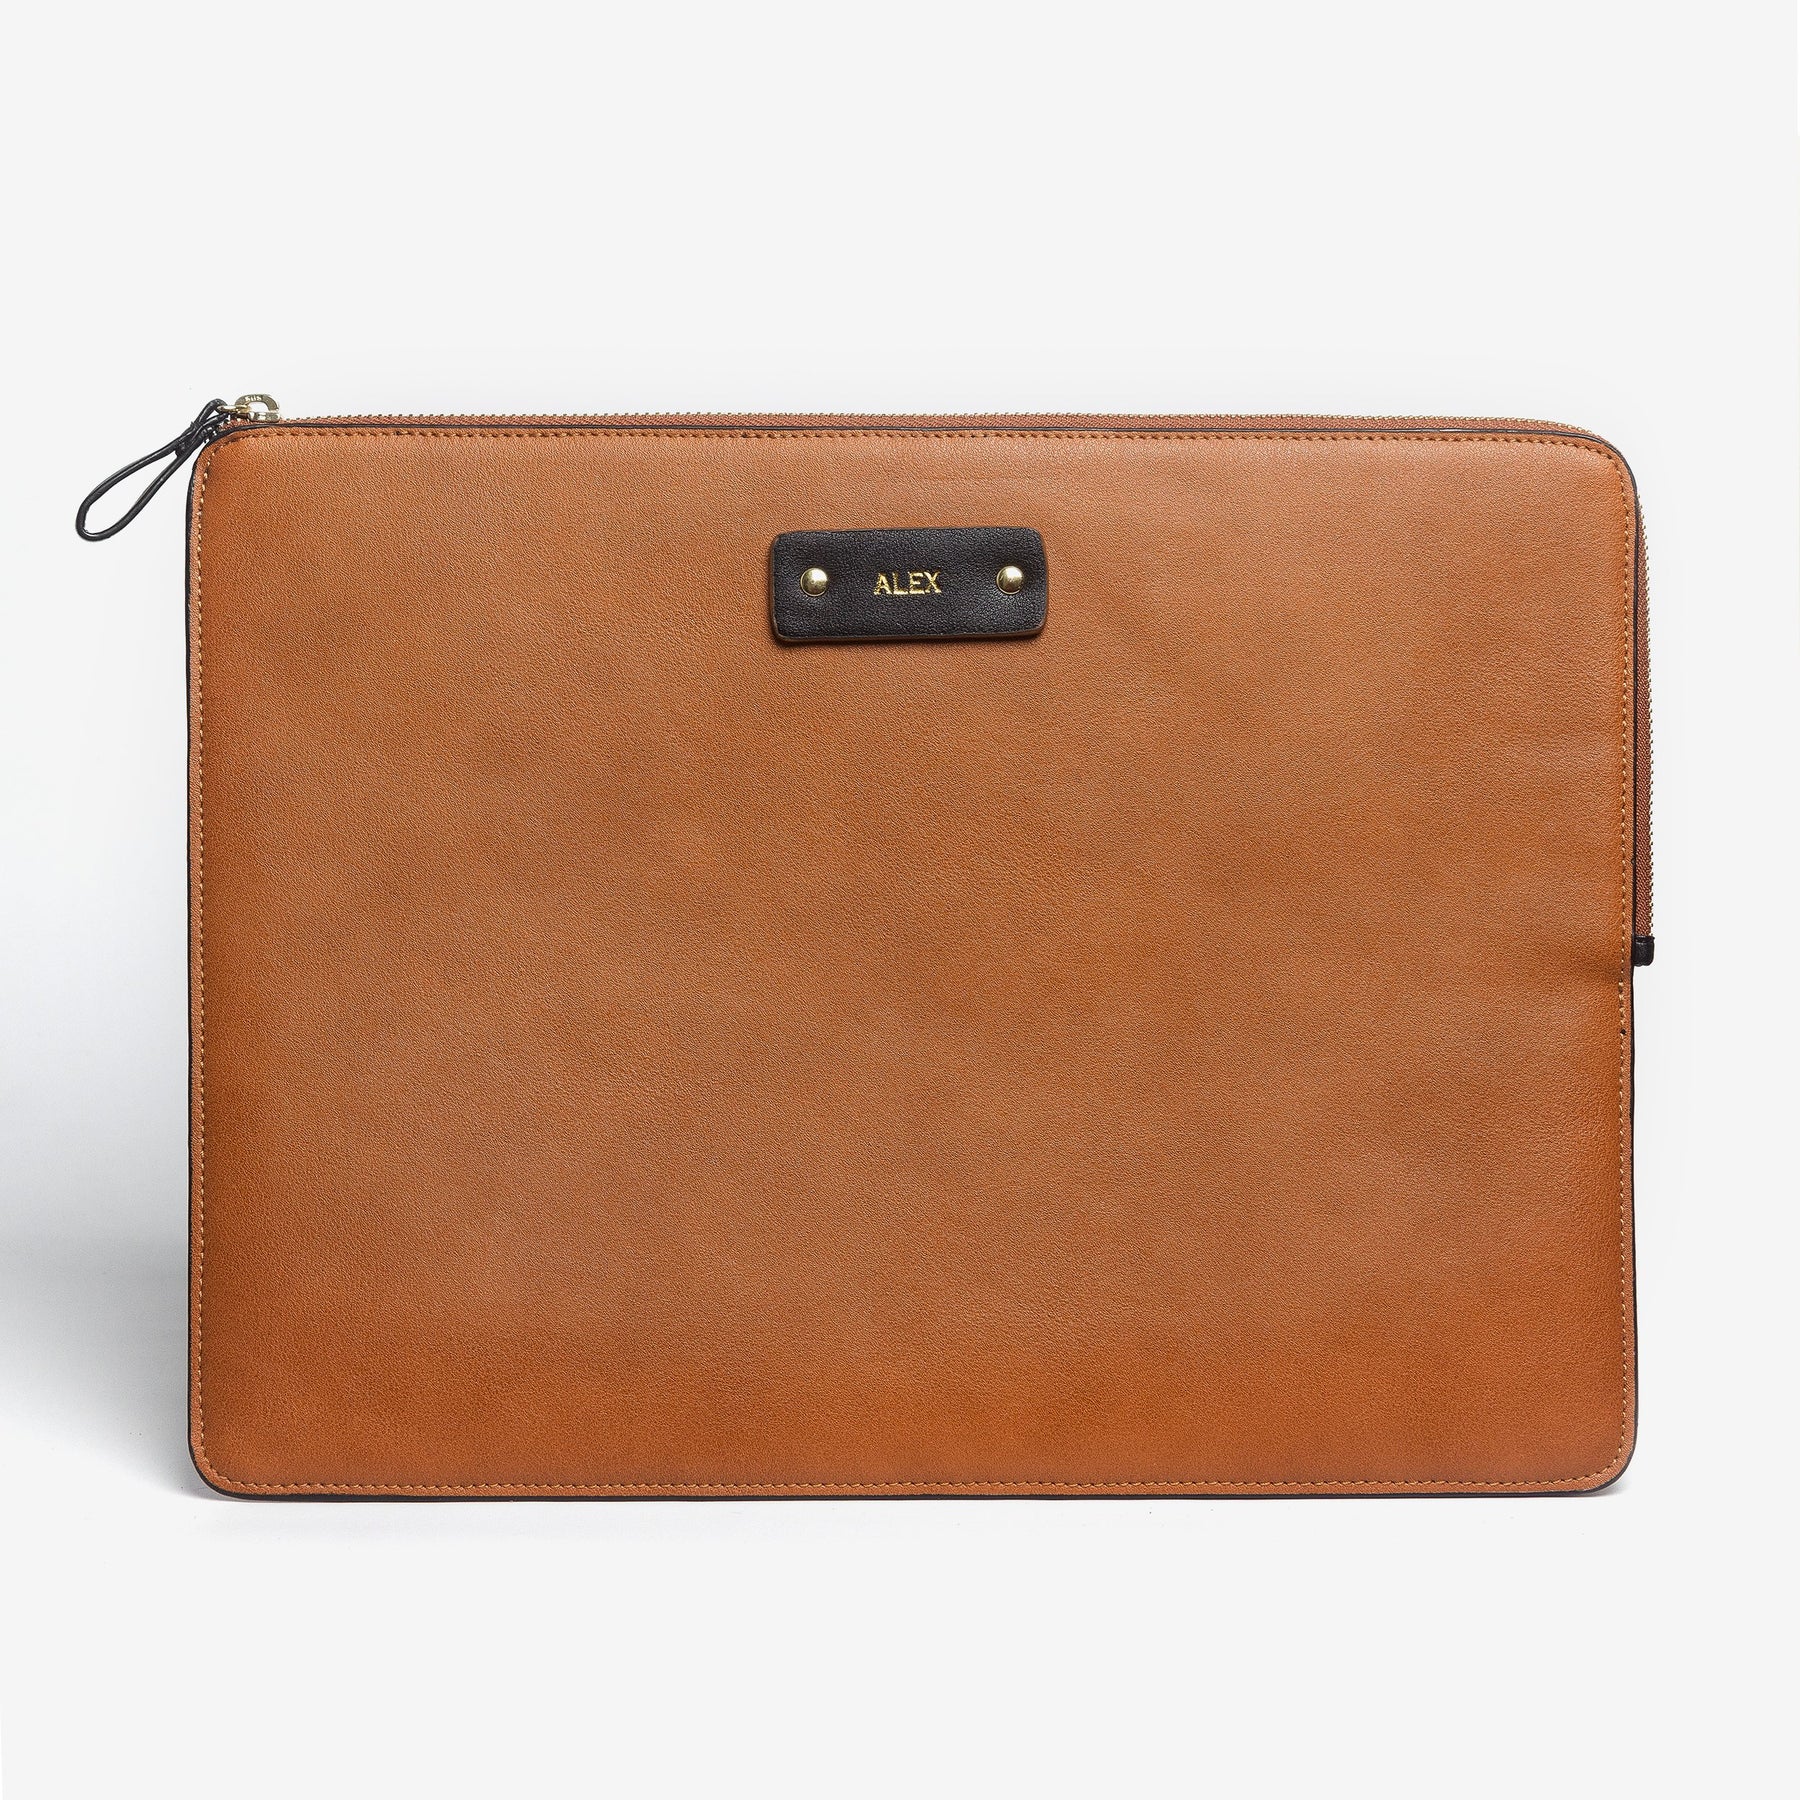 Design your own laptop sleeve